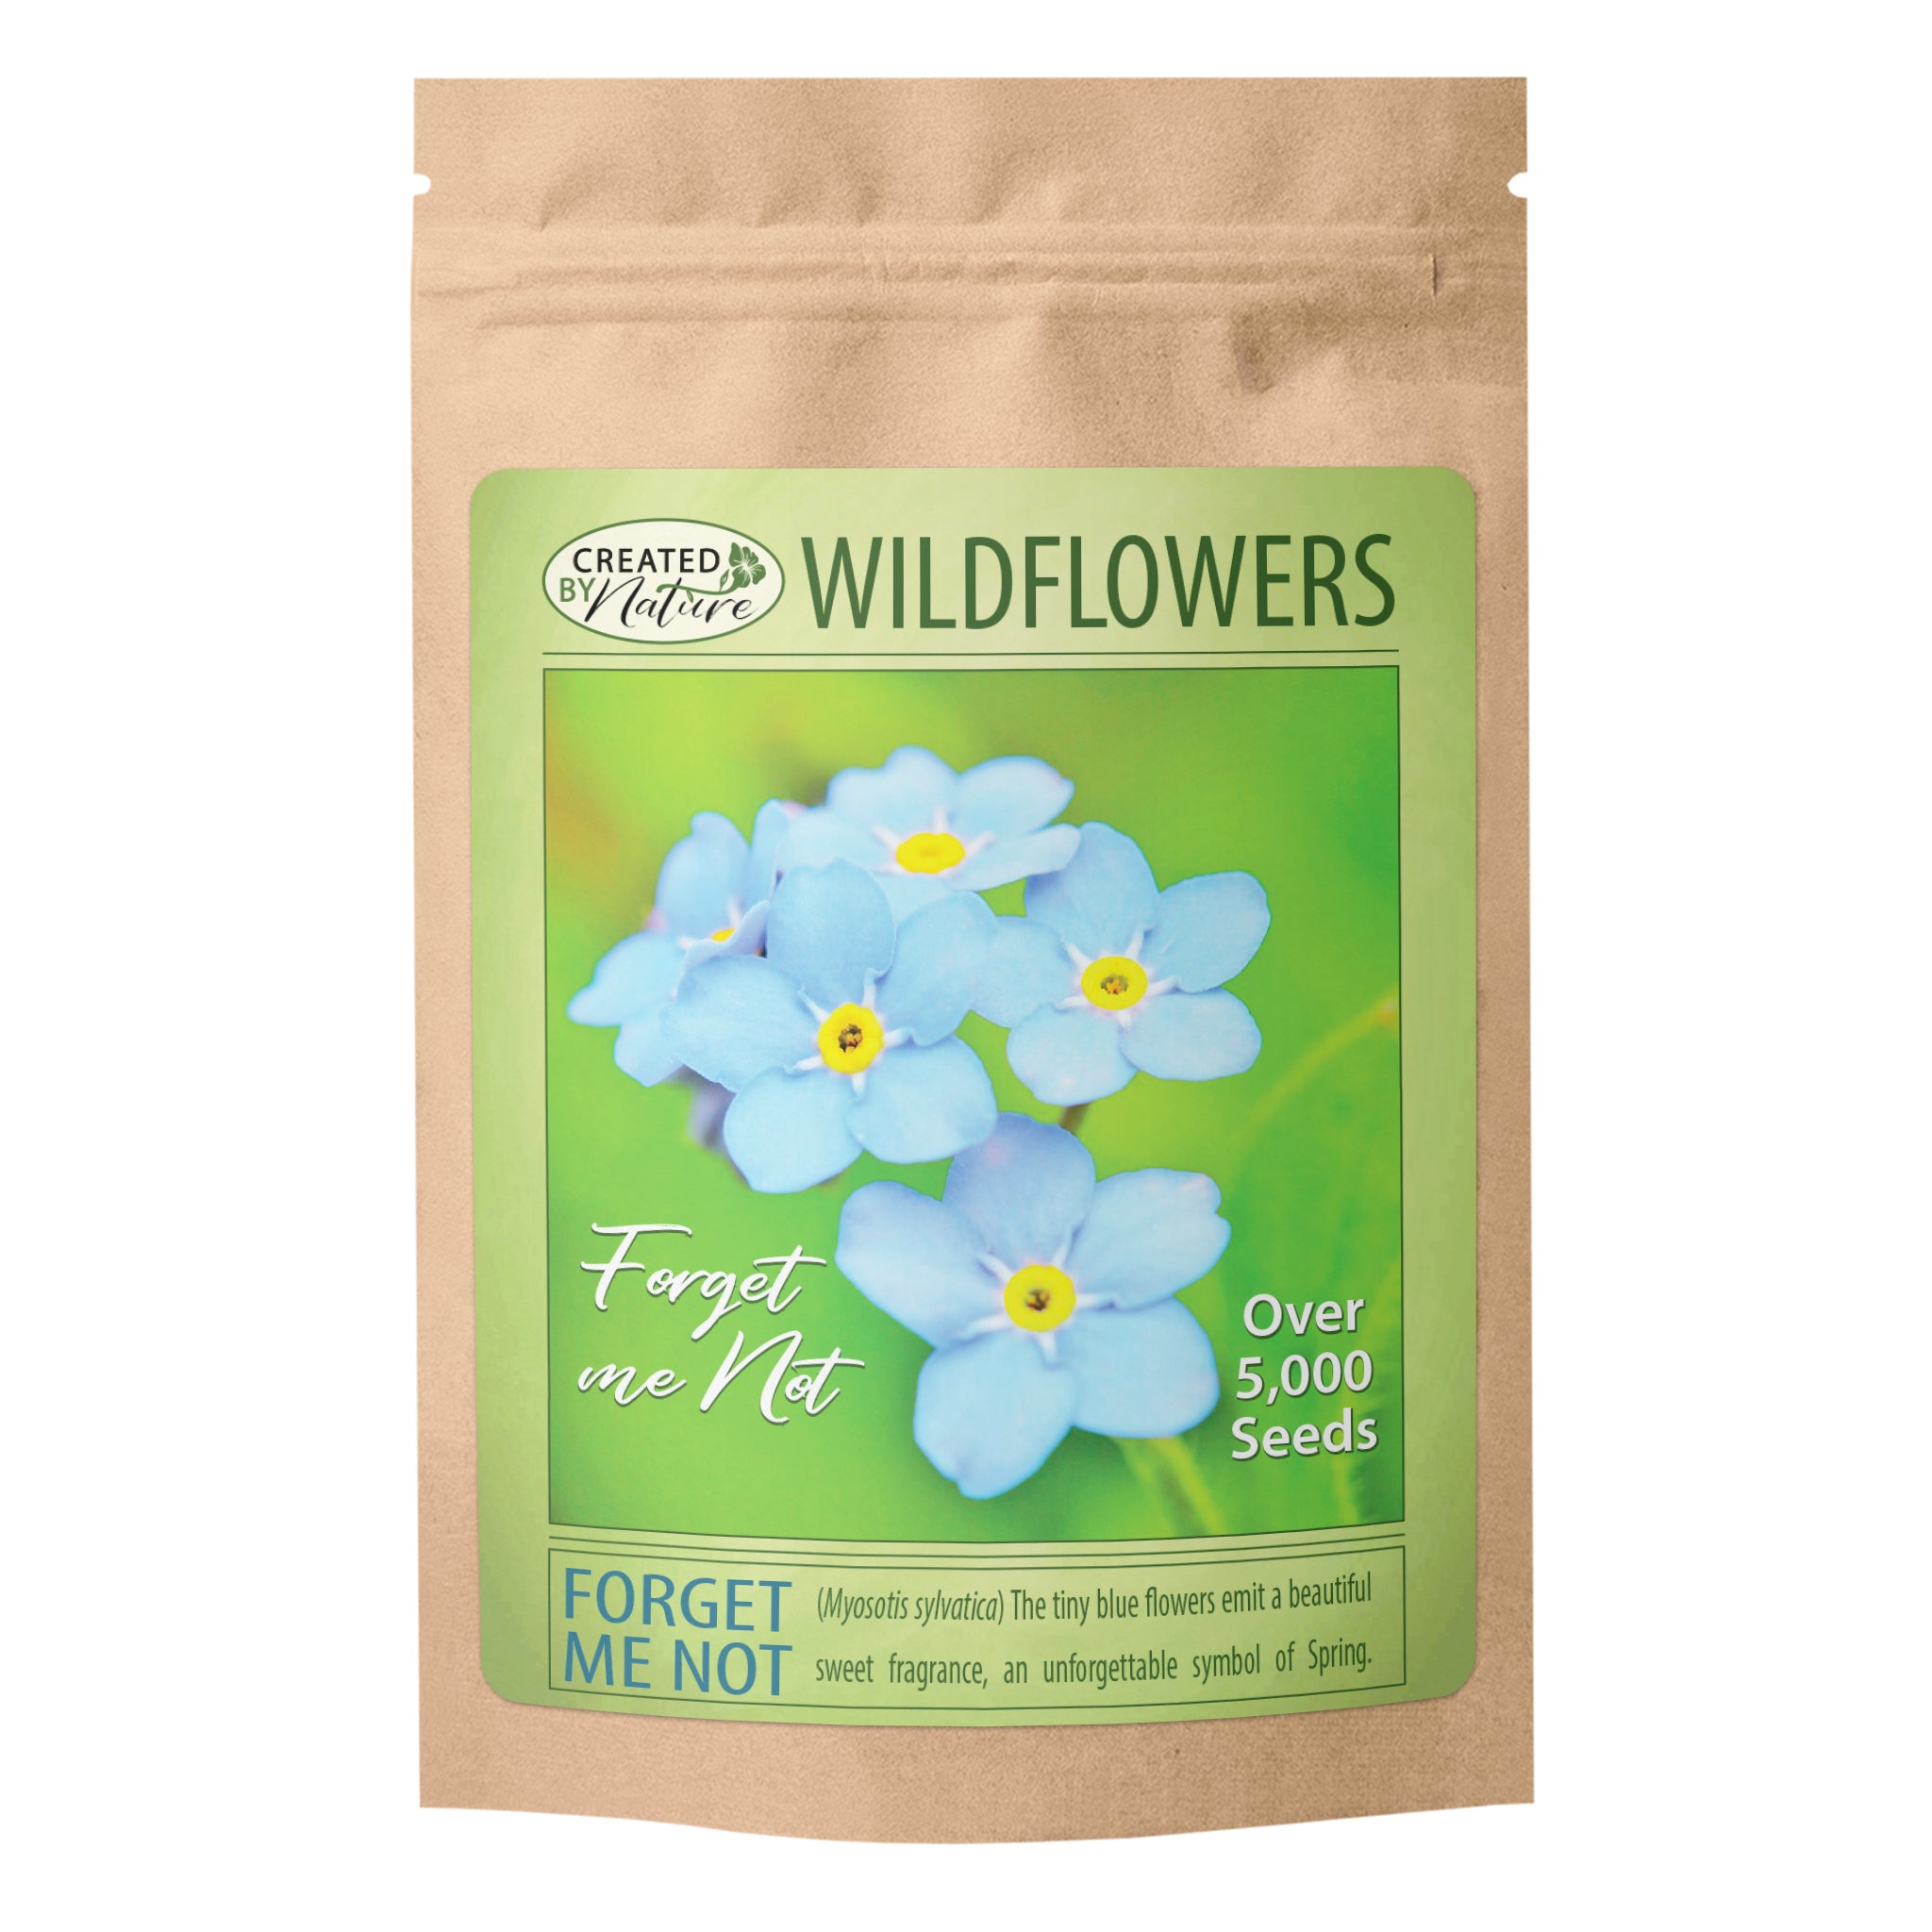 Where to Buy Flowers - Forget-Me-Not seeds 